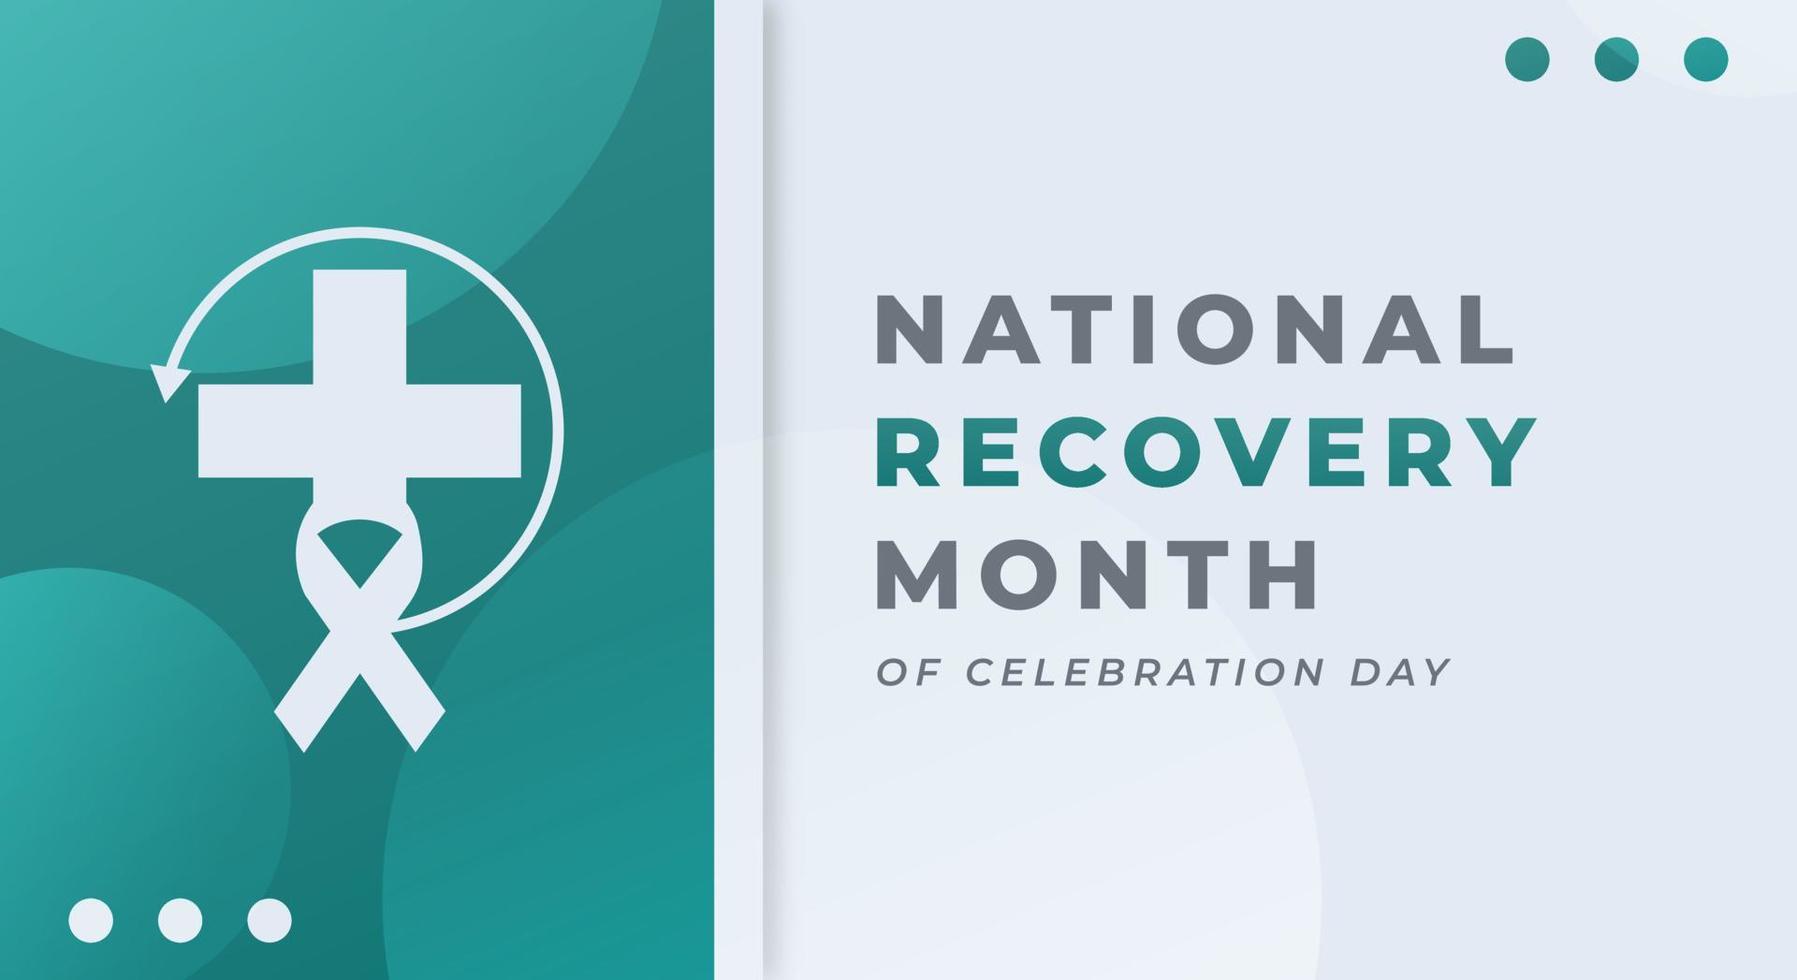 Happy National Recovery Month Celebration Vector Design Illustration for Background, Poster, Banner, Advertising, Greeting Card